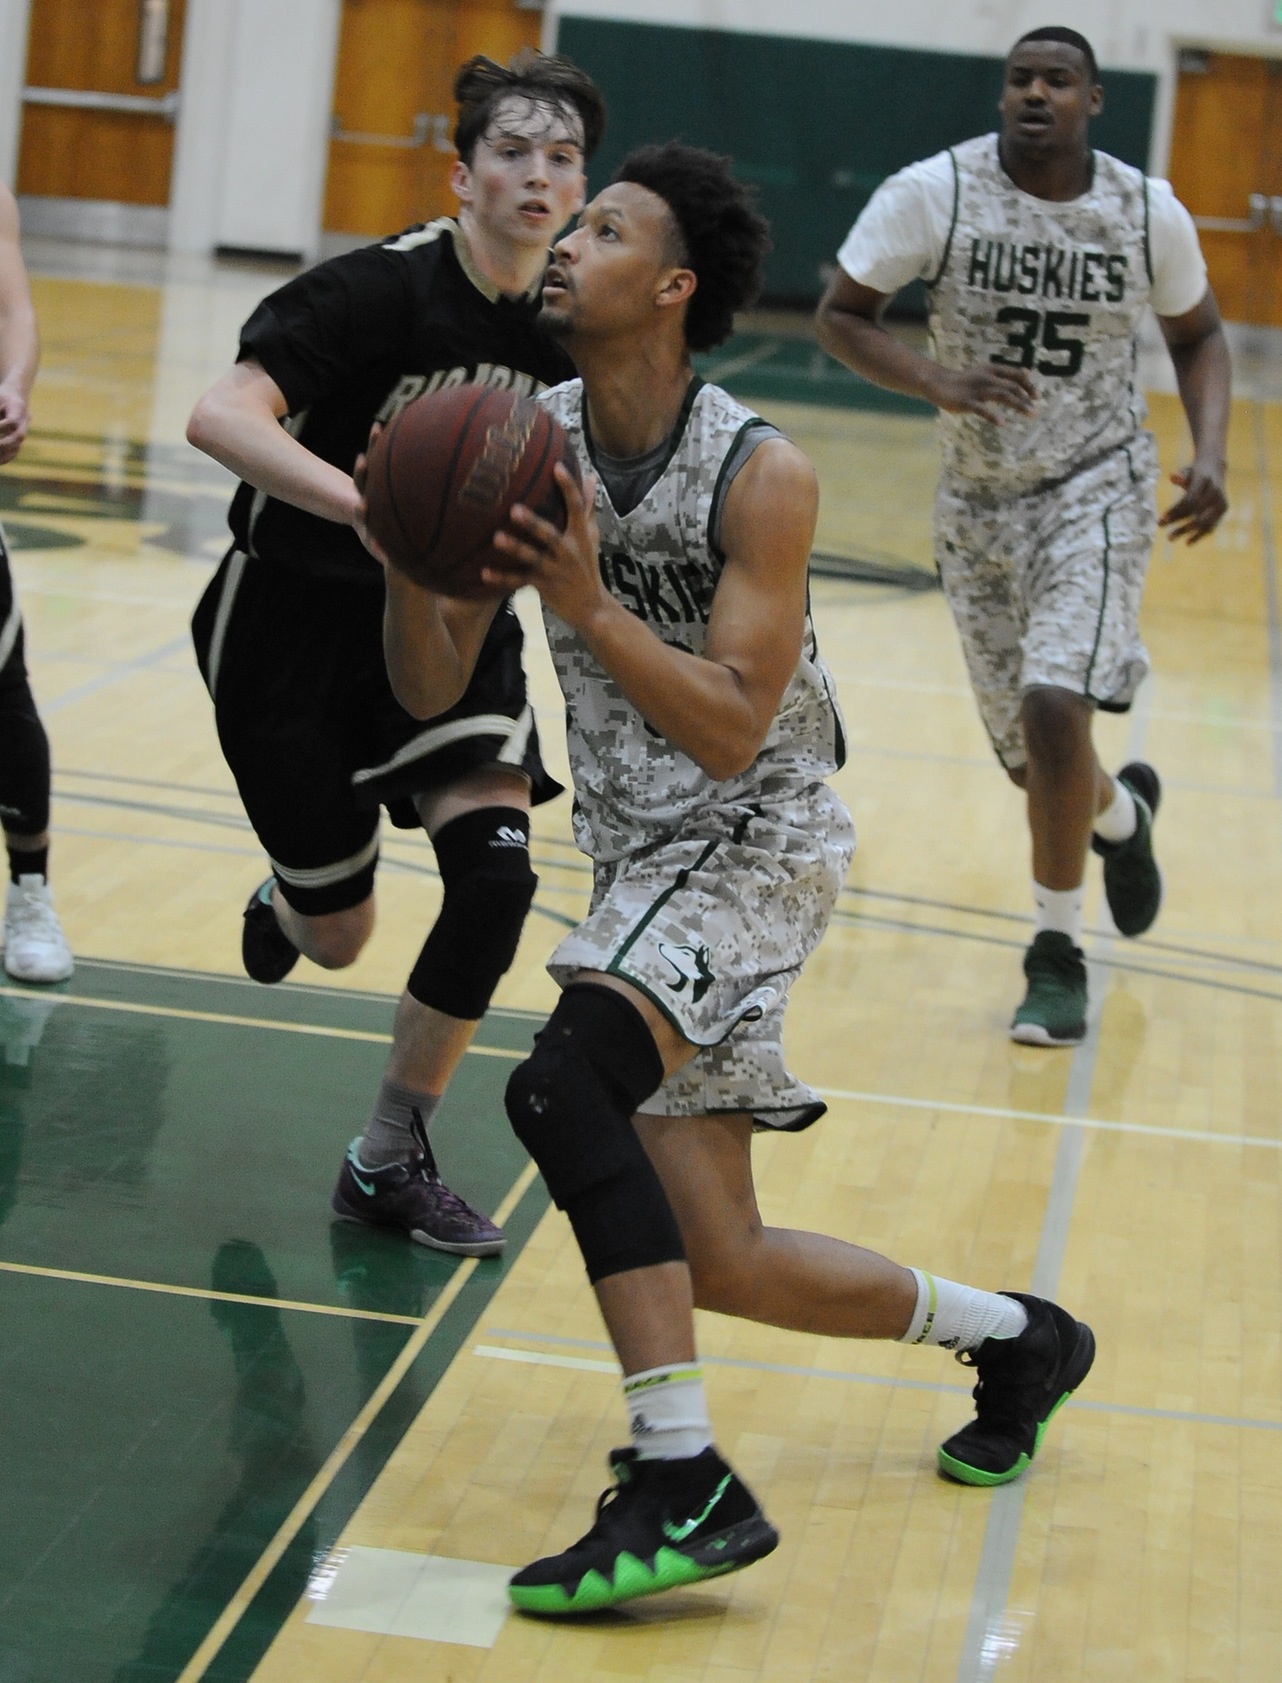 East Los Angeles College guard Alec Hickman drives to the basket to score two of his team-high 20 points in Wednesday’s game versus Rio Hondo.